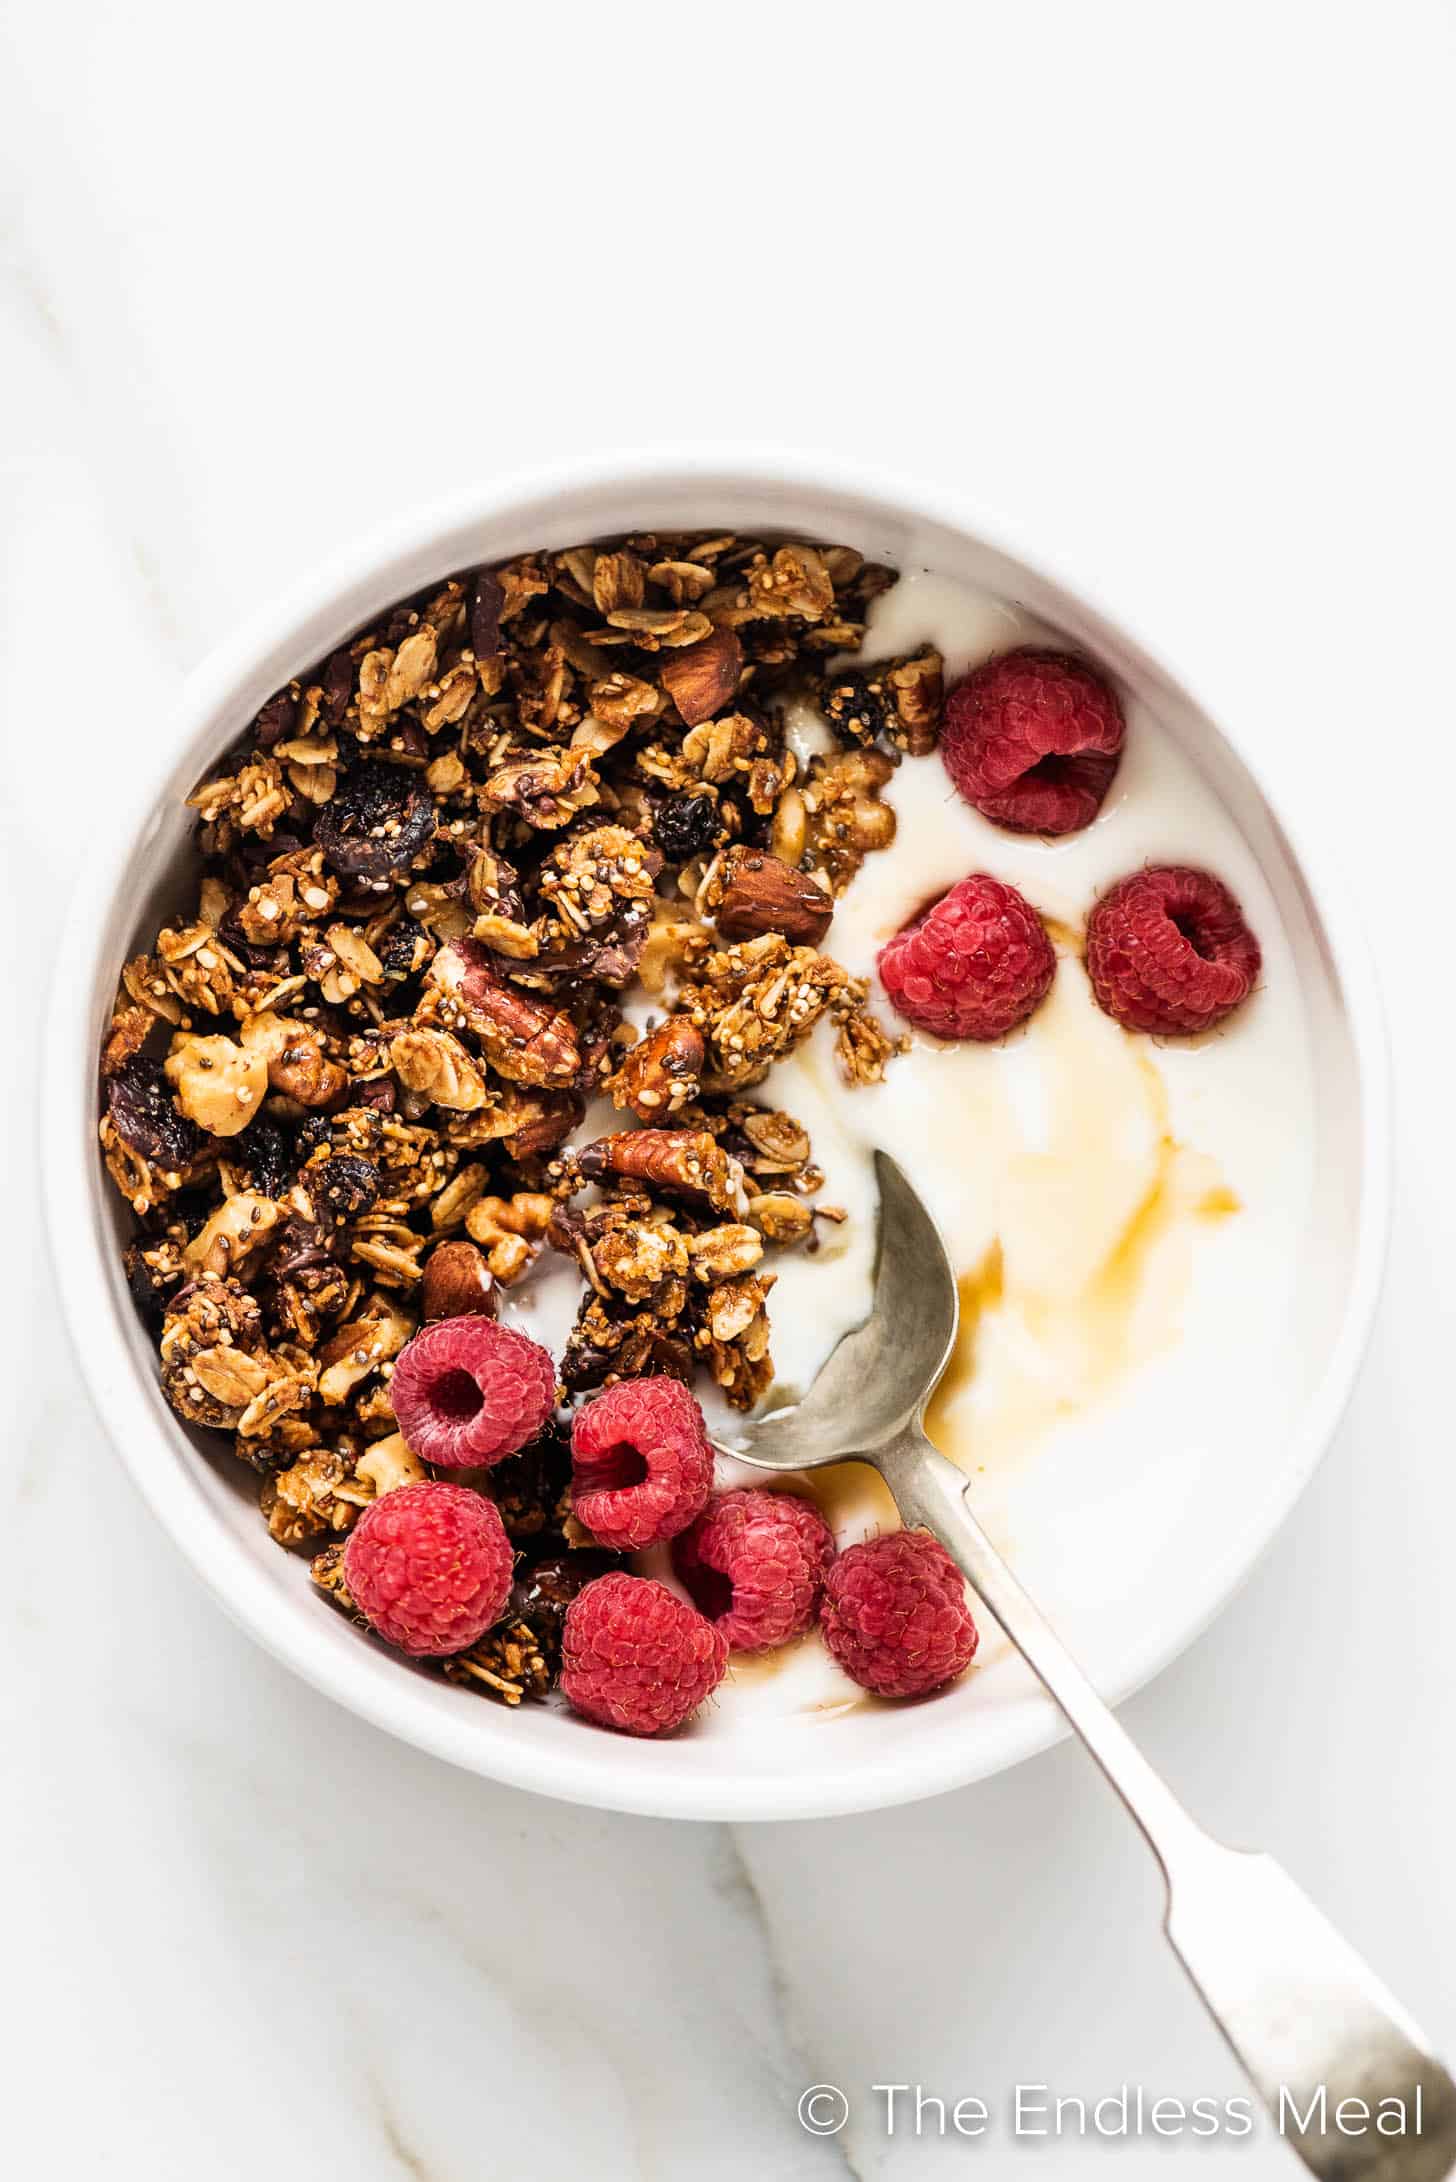 breakfast granola with superfood ingredients in a bowl with yogurt and raspberries